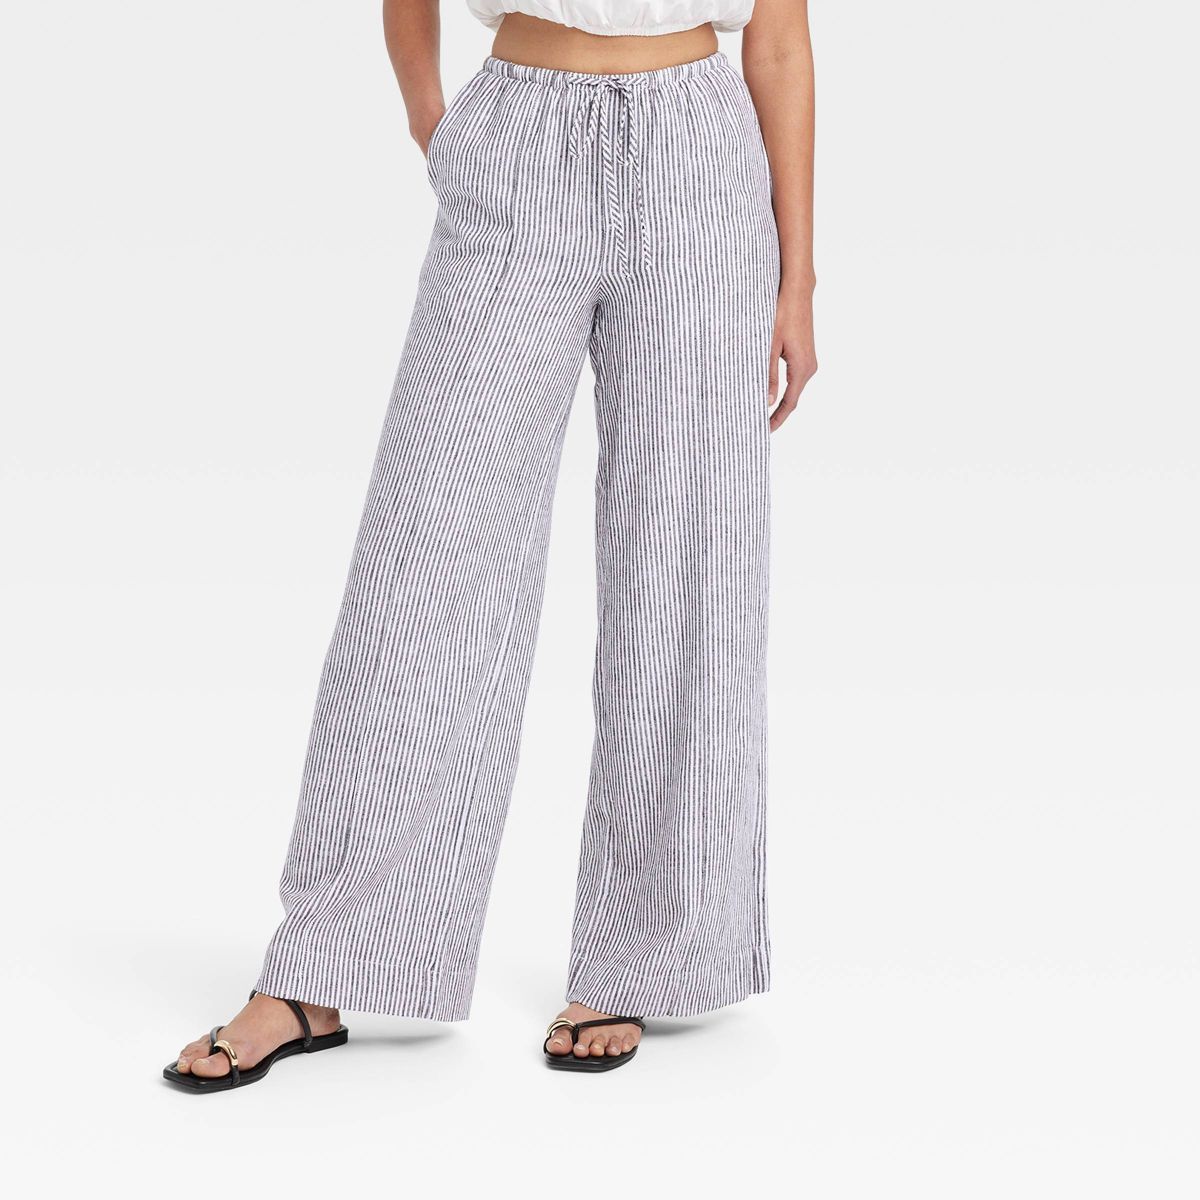 Women's High-Rise Wide Leg Linen Pull-On Pants - A New Day™ Black/White Striped M | Target